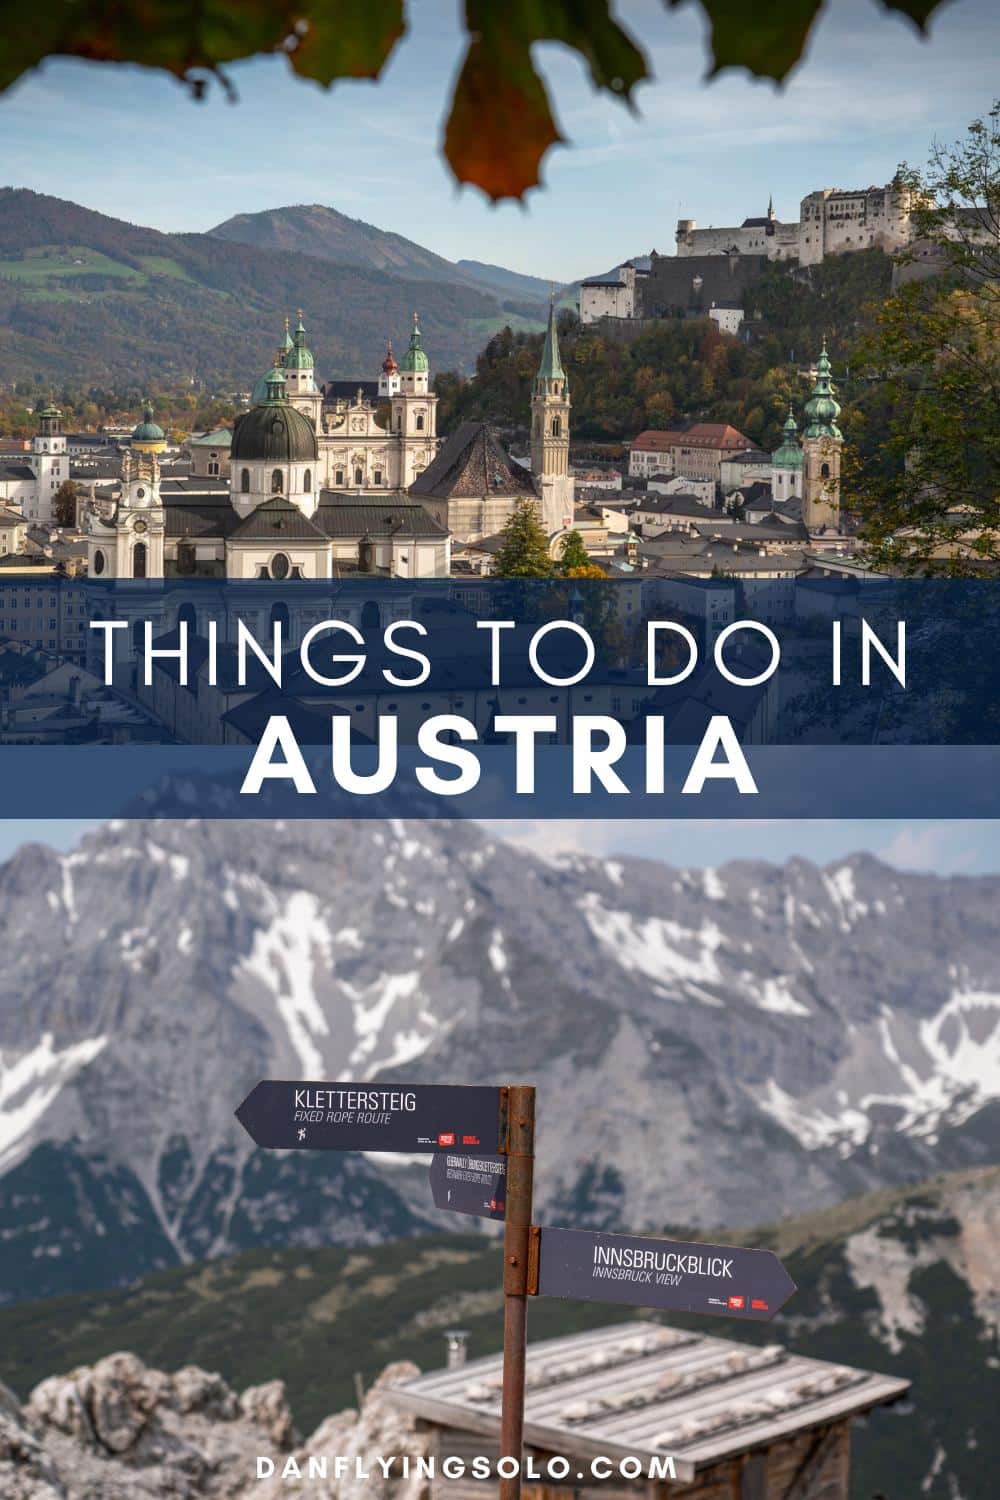 From experiencing the epic Alps and lakes to Imperial cities and unique attractions, these top things to do in Austria are unforgettable.